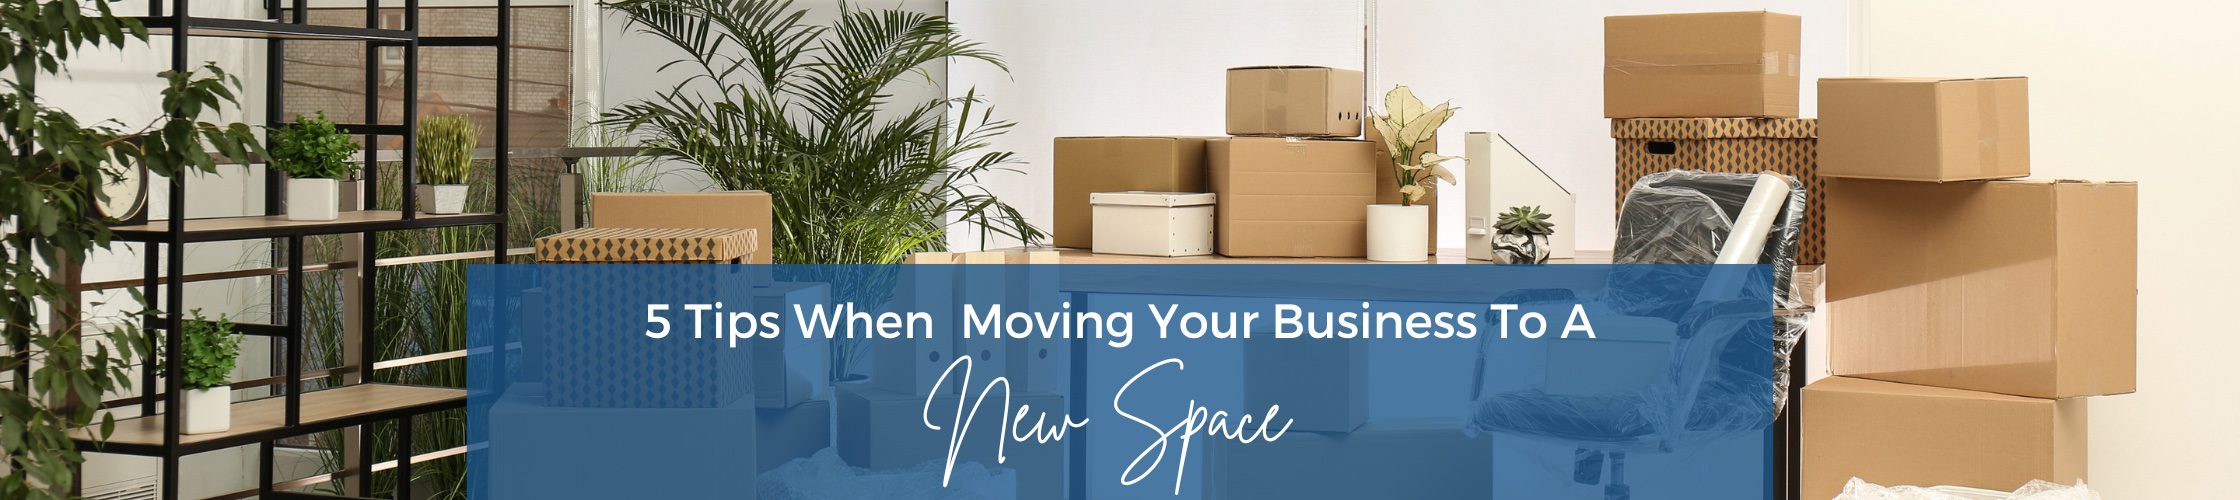 5 Tips When Moving Your Business